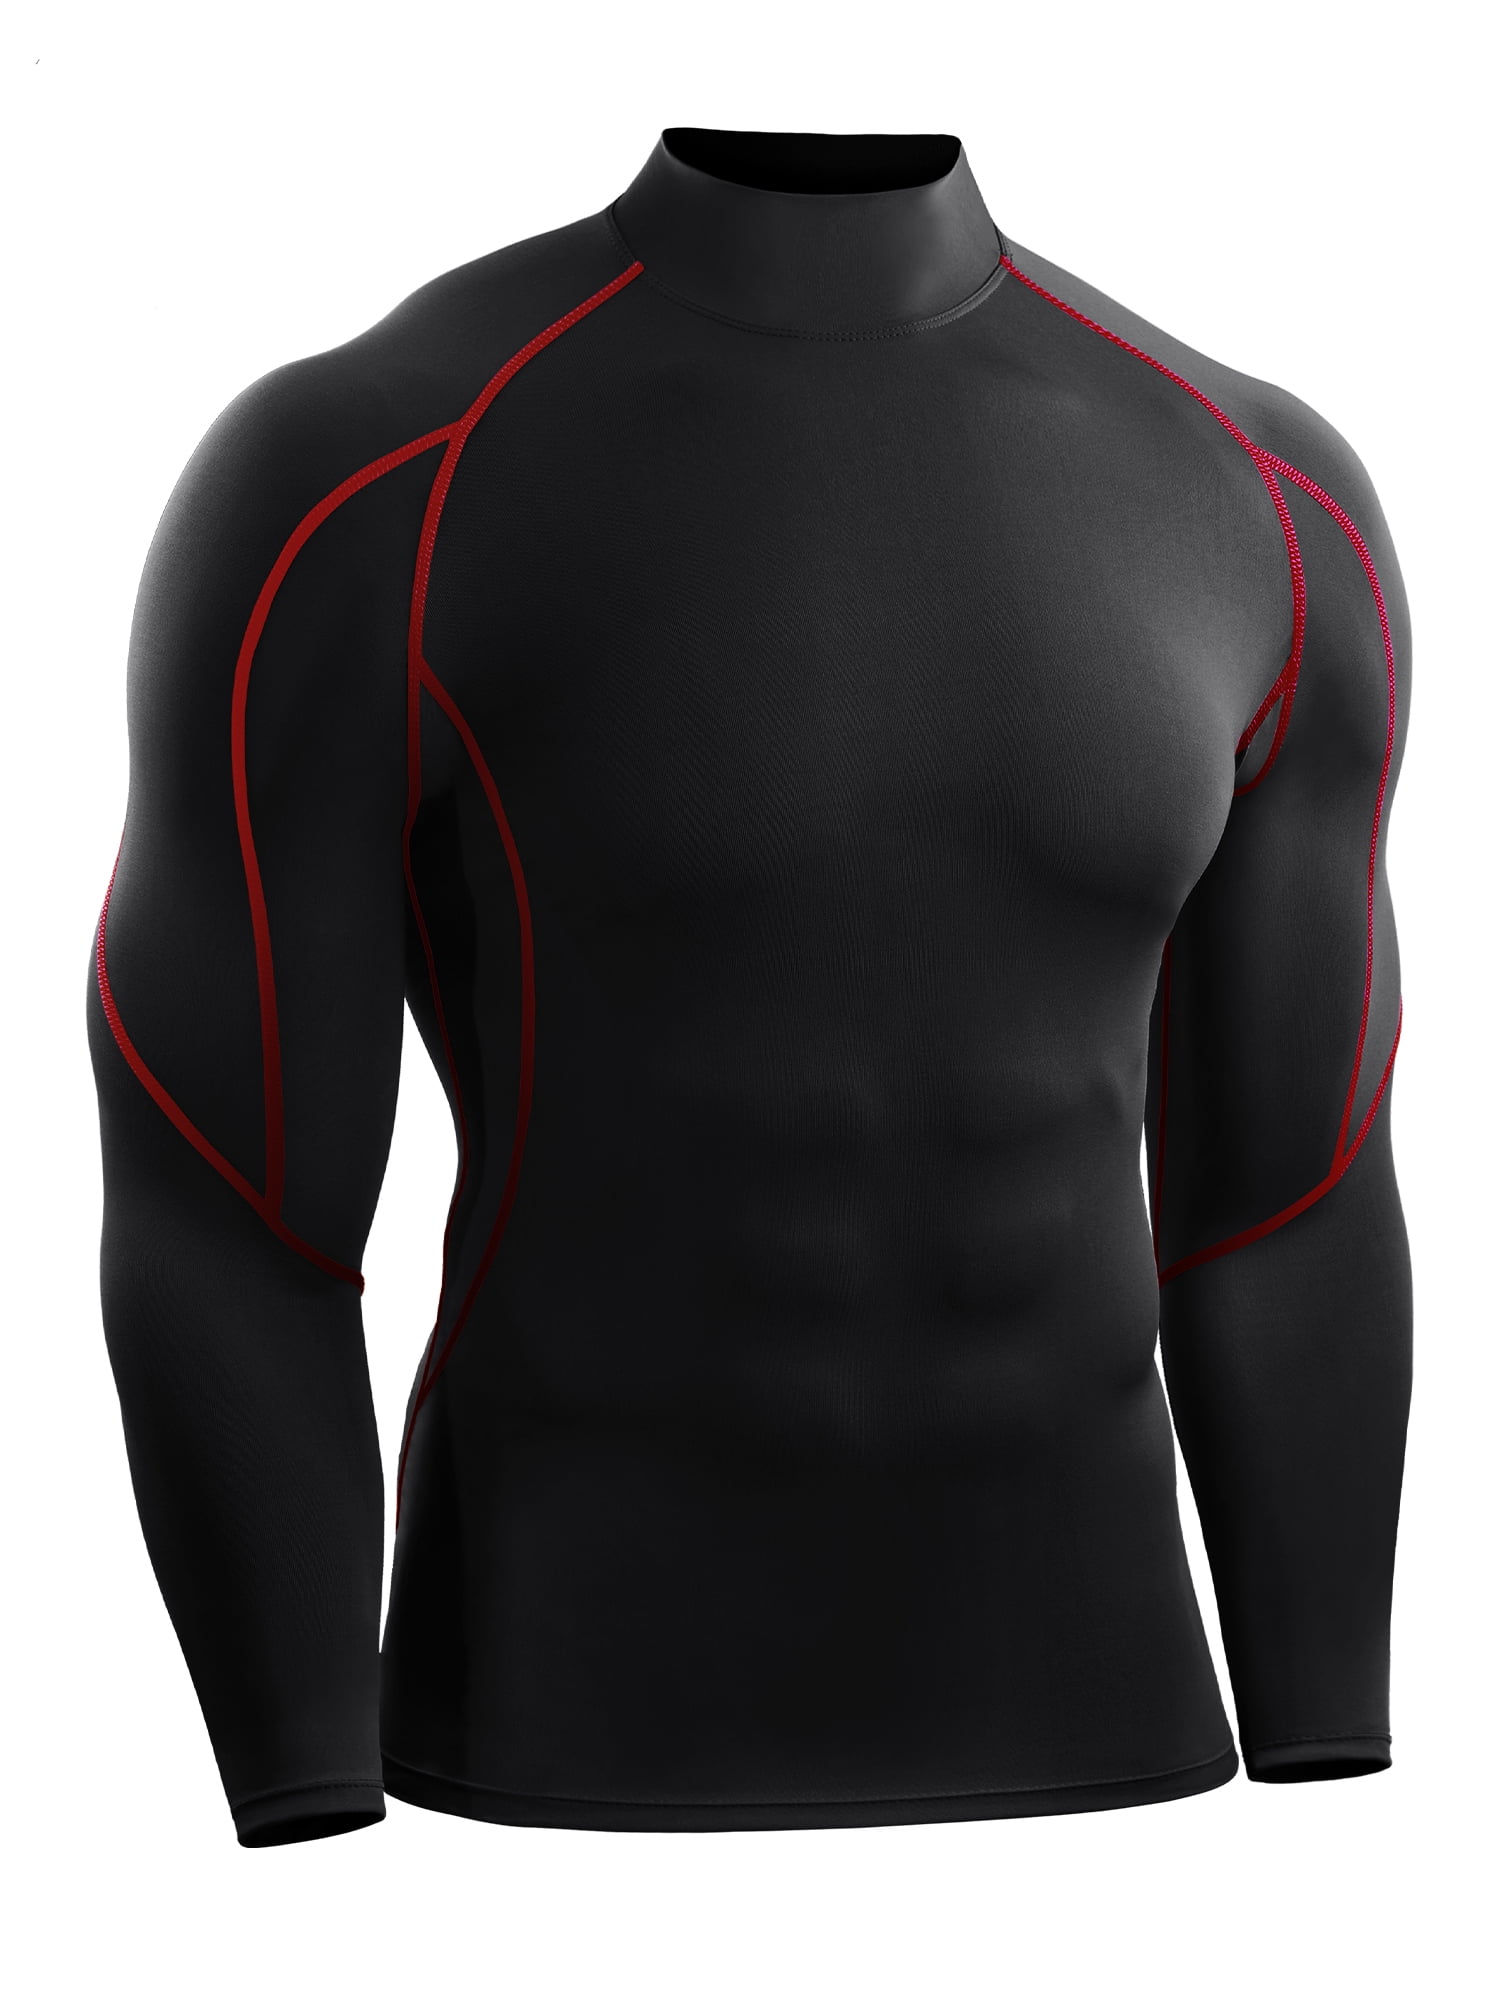 Men's Pro Performance Compression Shirt Long Sleeve Base Layer Thermal Top Mock 